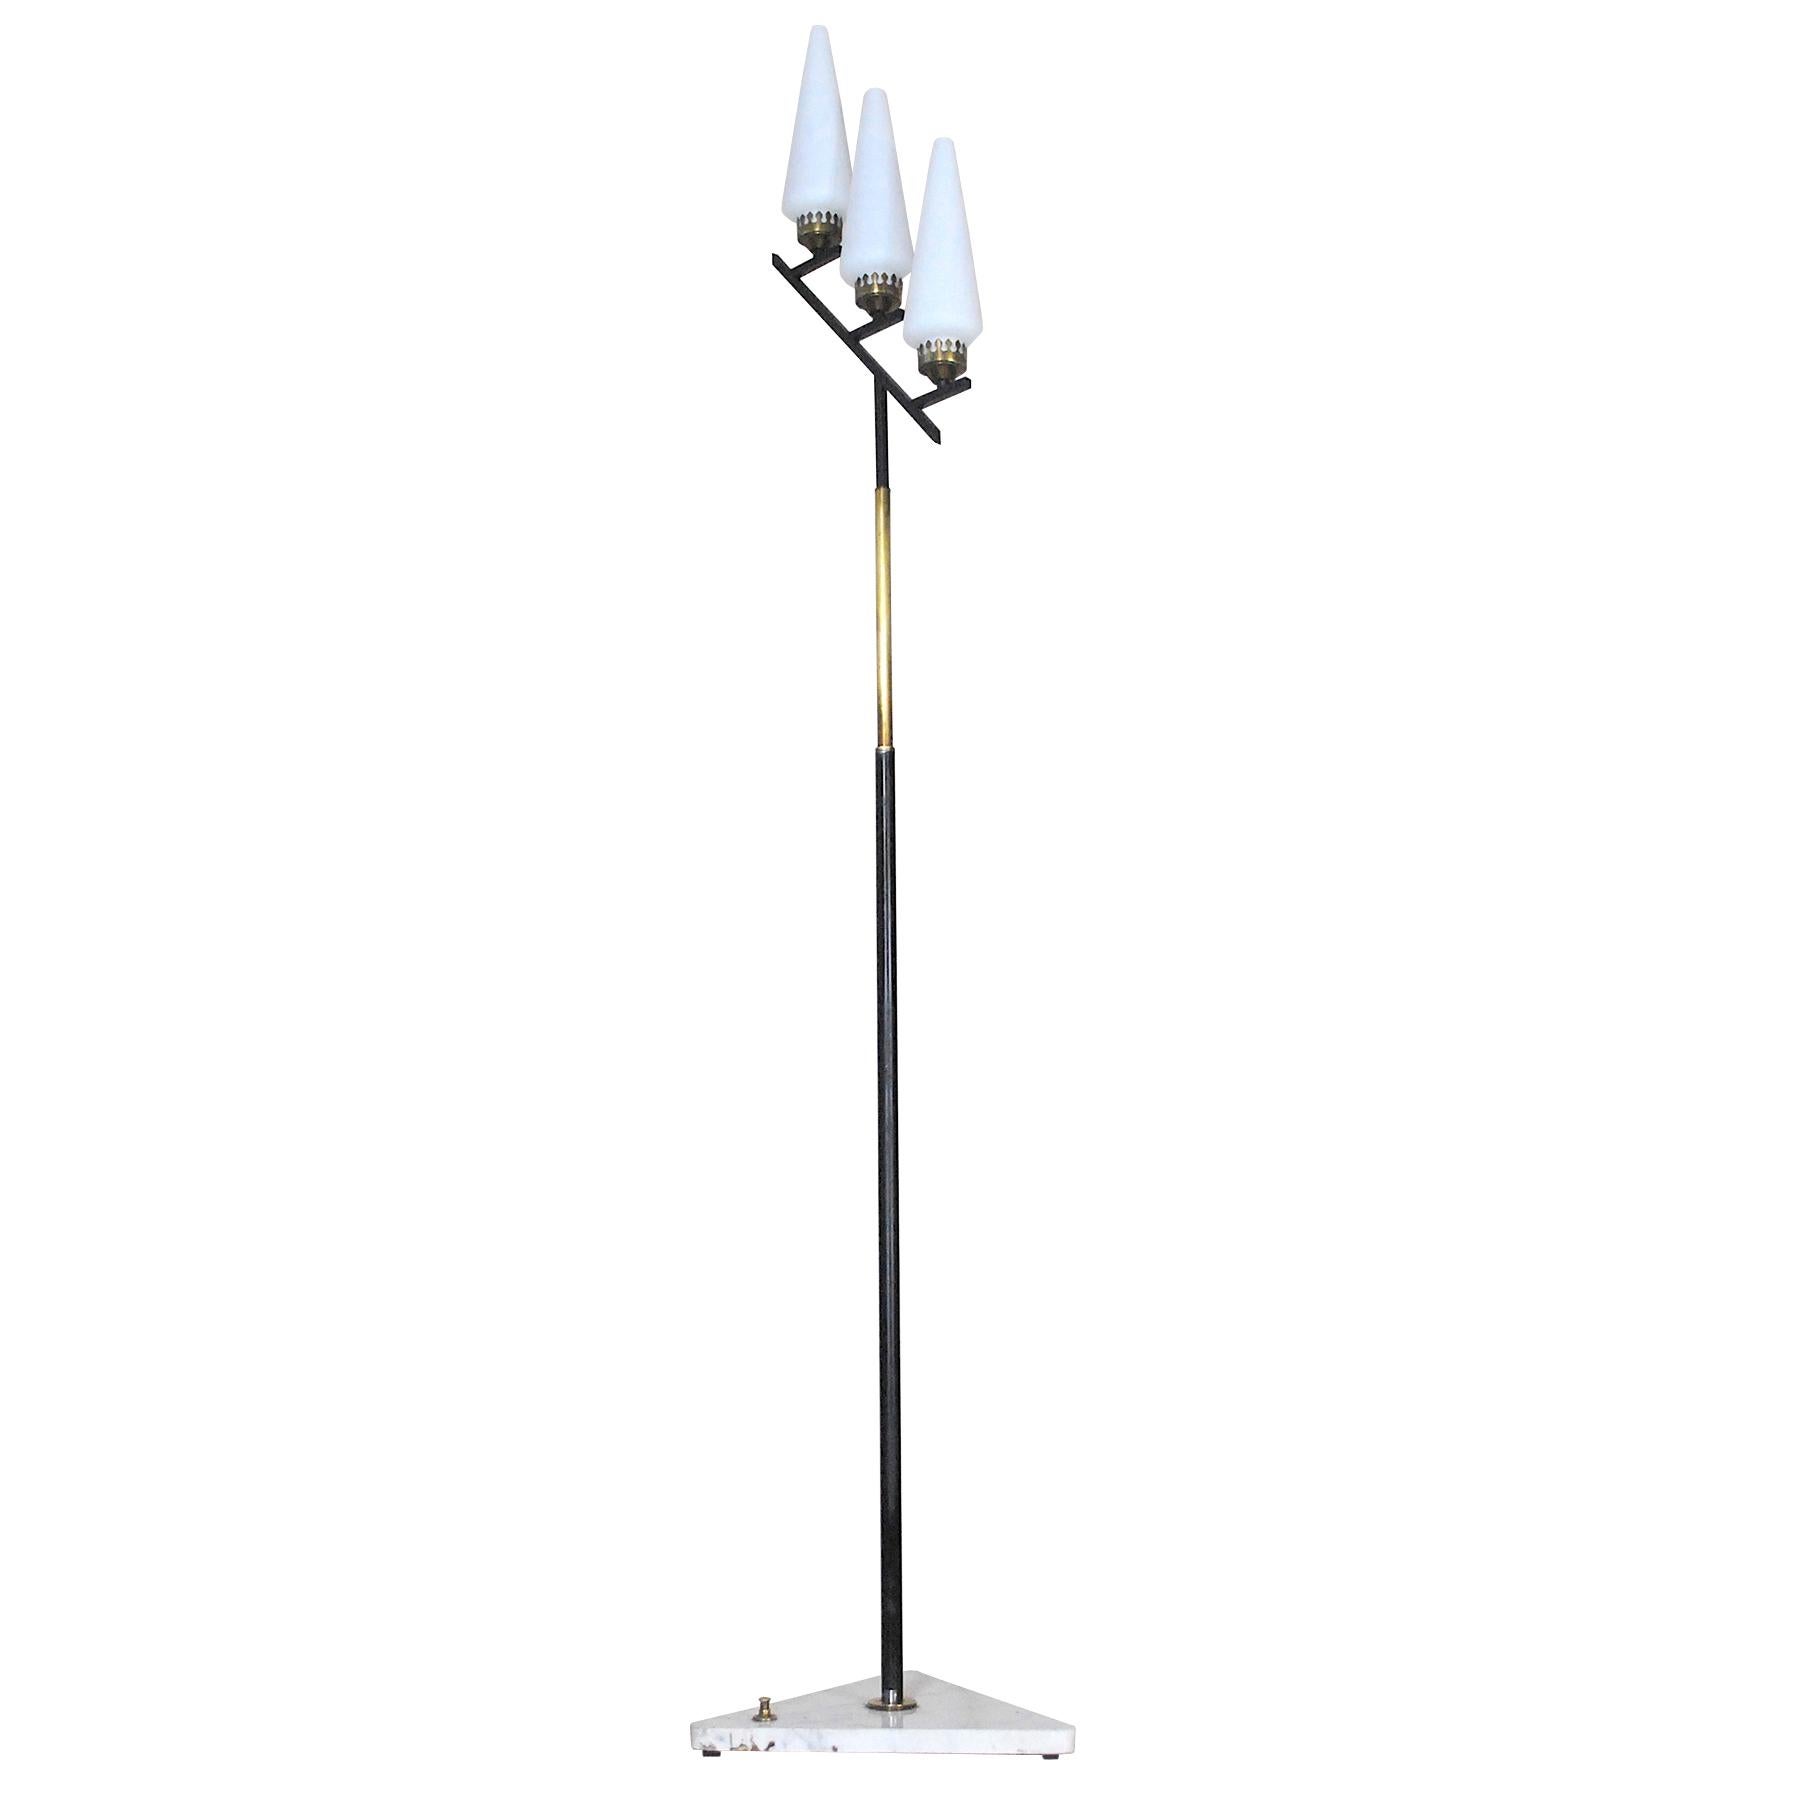 Stilnovo Italian Midcentury Floor Lamp in Brass and Opaline from the 1950s For Sale 4